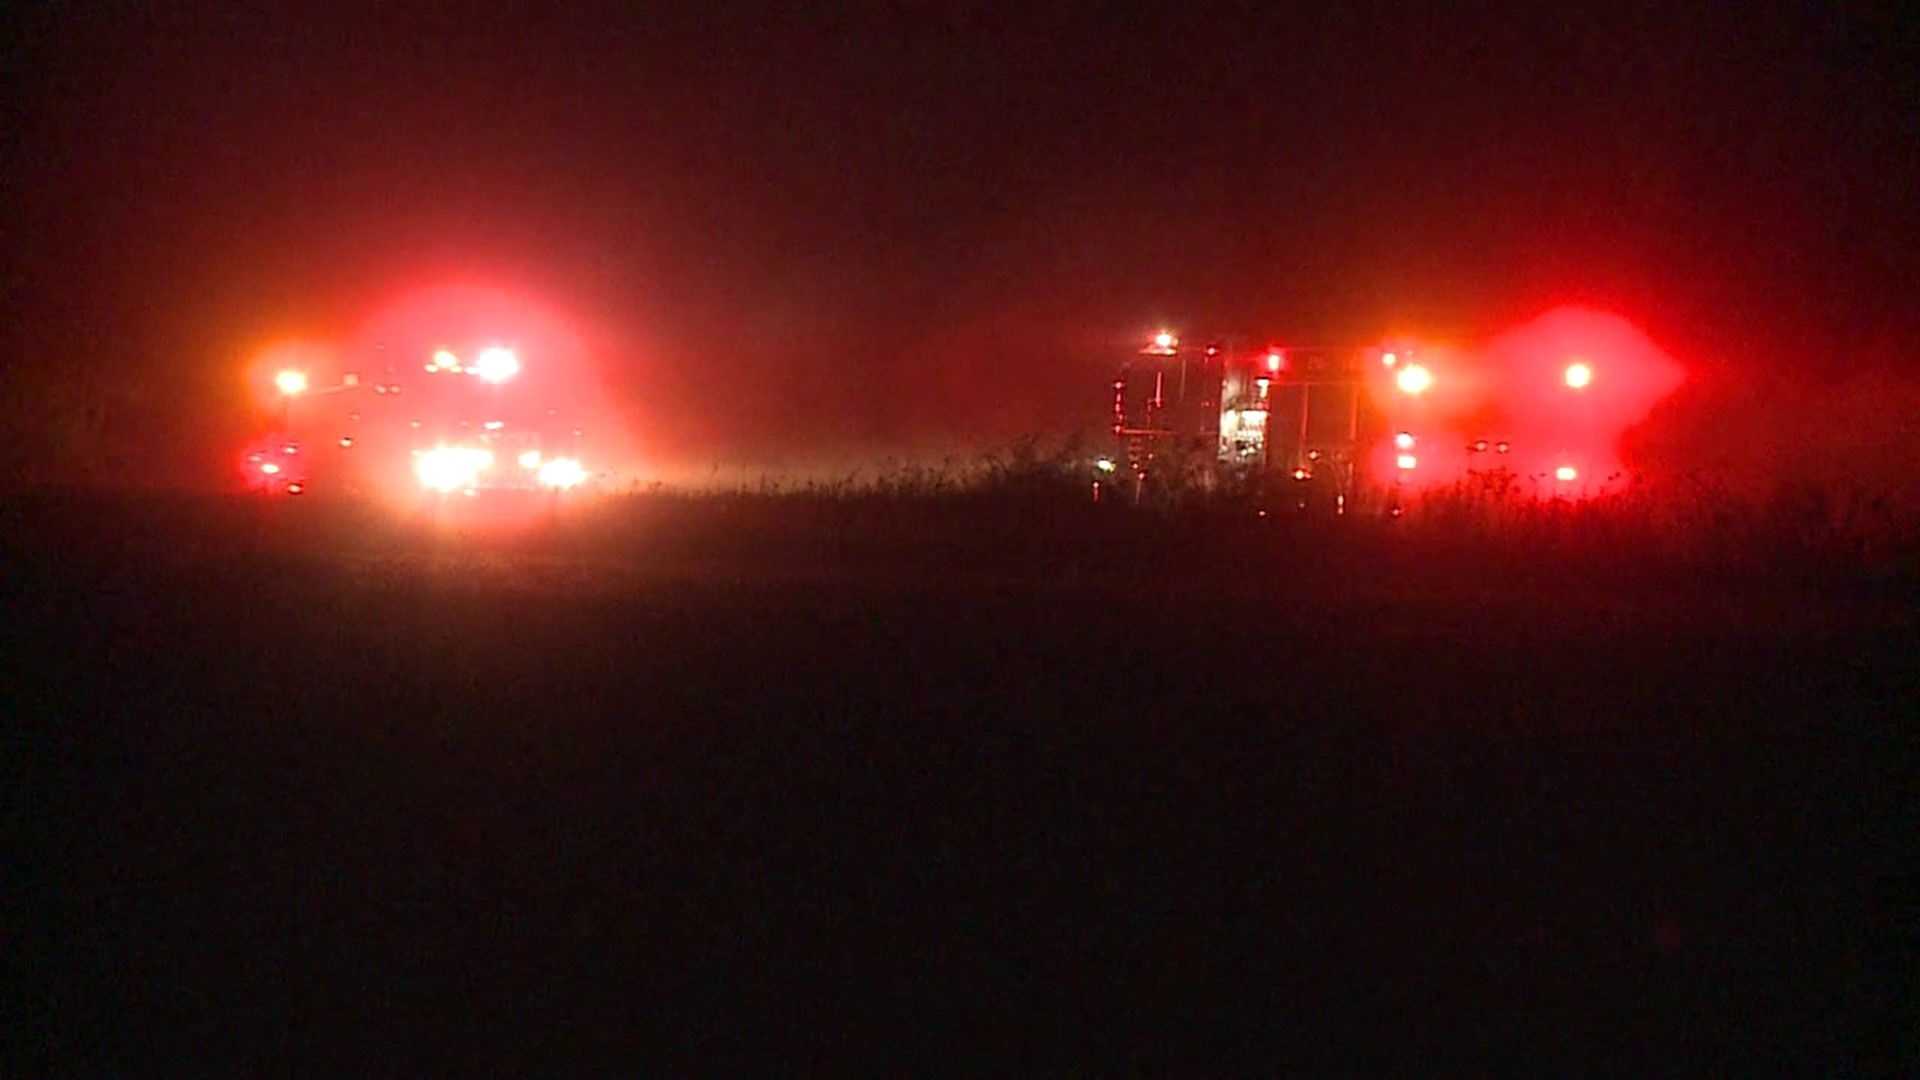 Flames broke out around 10 p.m. Saturday night along Valley View Drive in Newton Township.